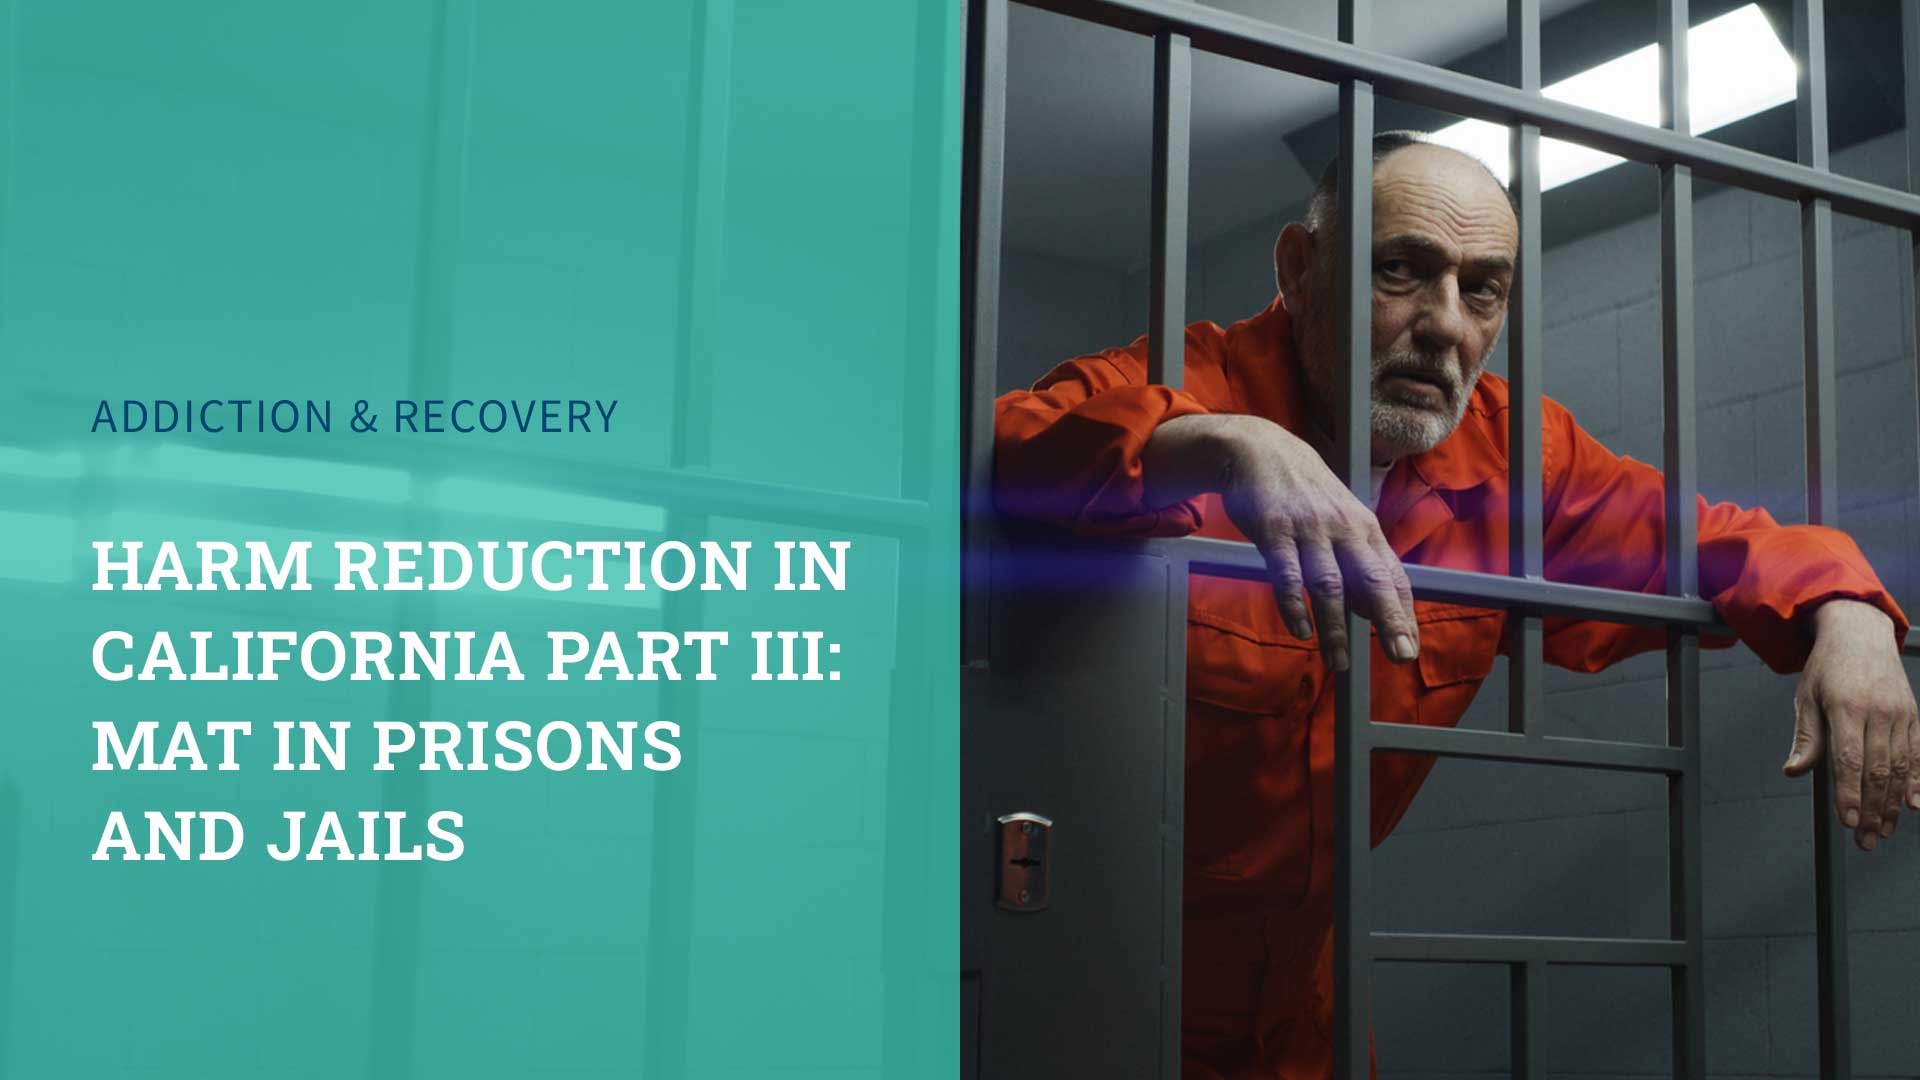 Harm Reduction in California Part III: MAT in Prisons and Jails